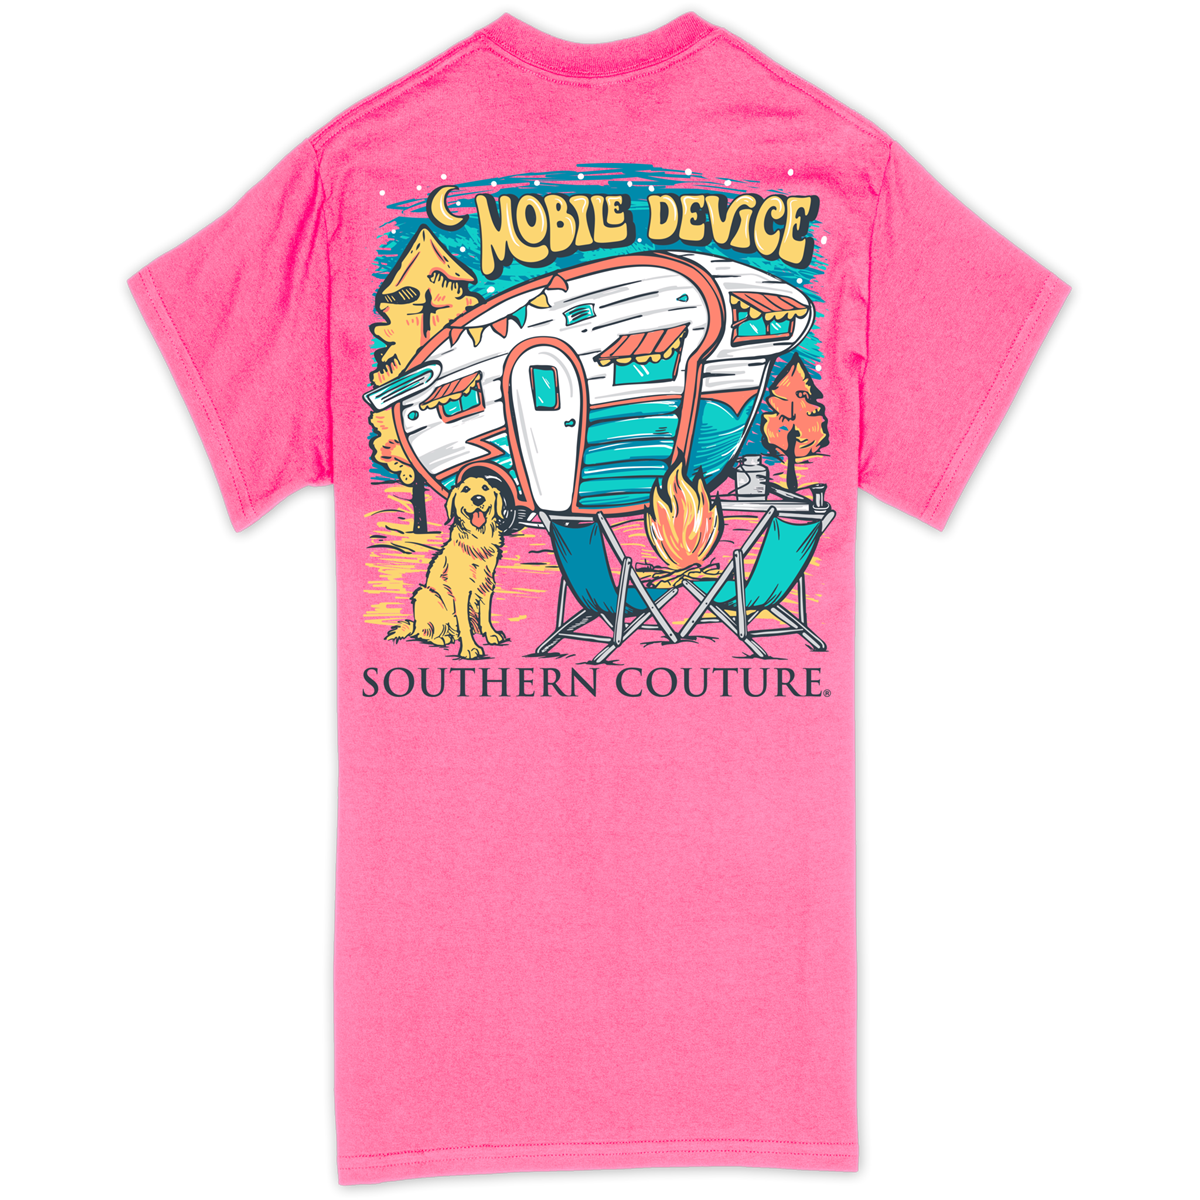 Southern Couture Classic Mobile Device Camper T-Shirt